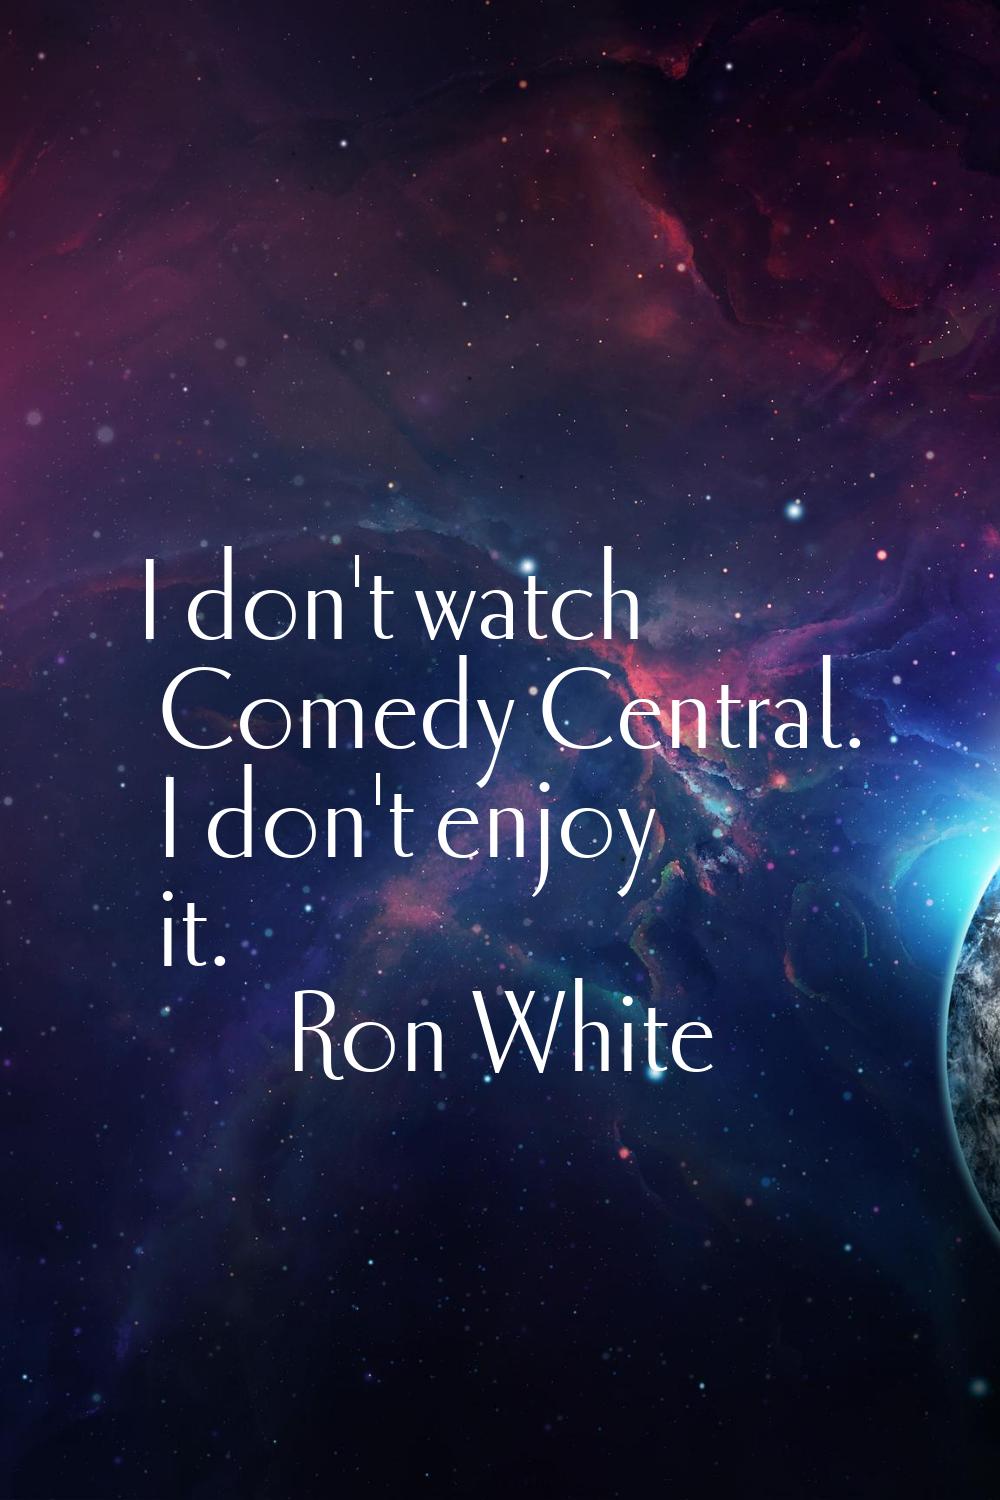 I don't watch Comedy Central. I don't enjoy it.